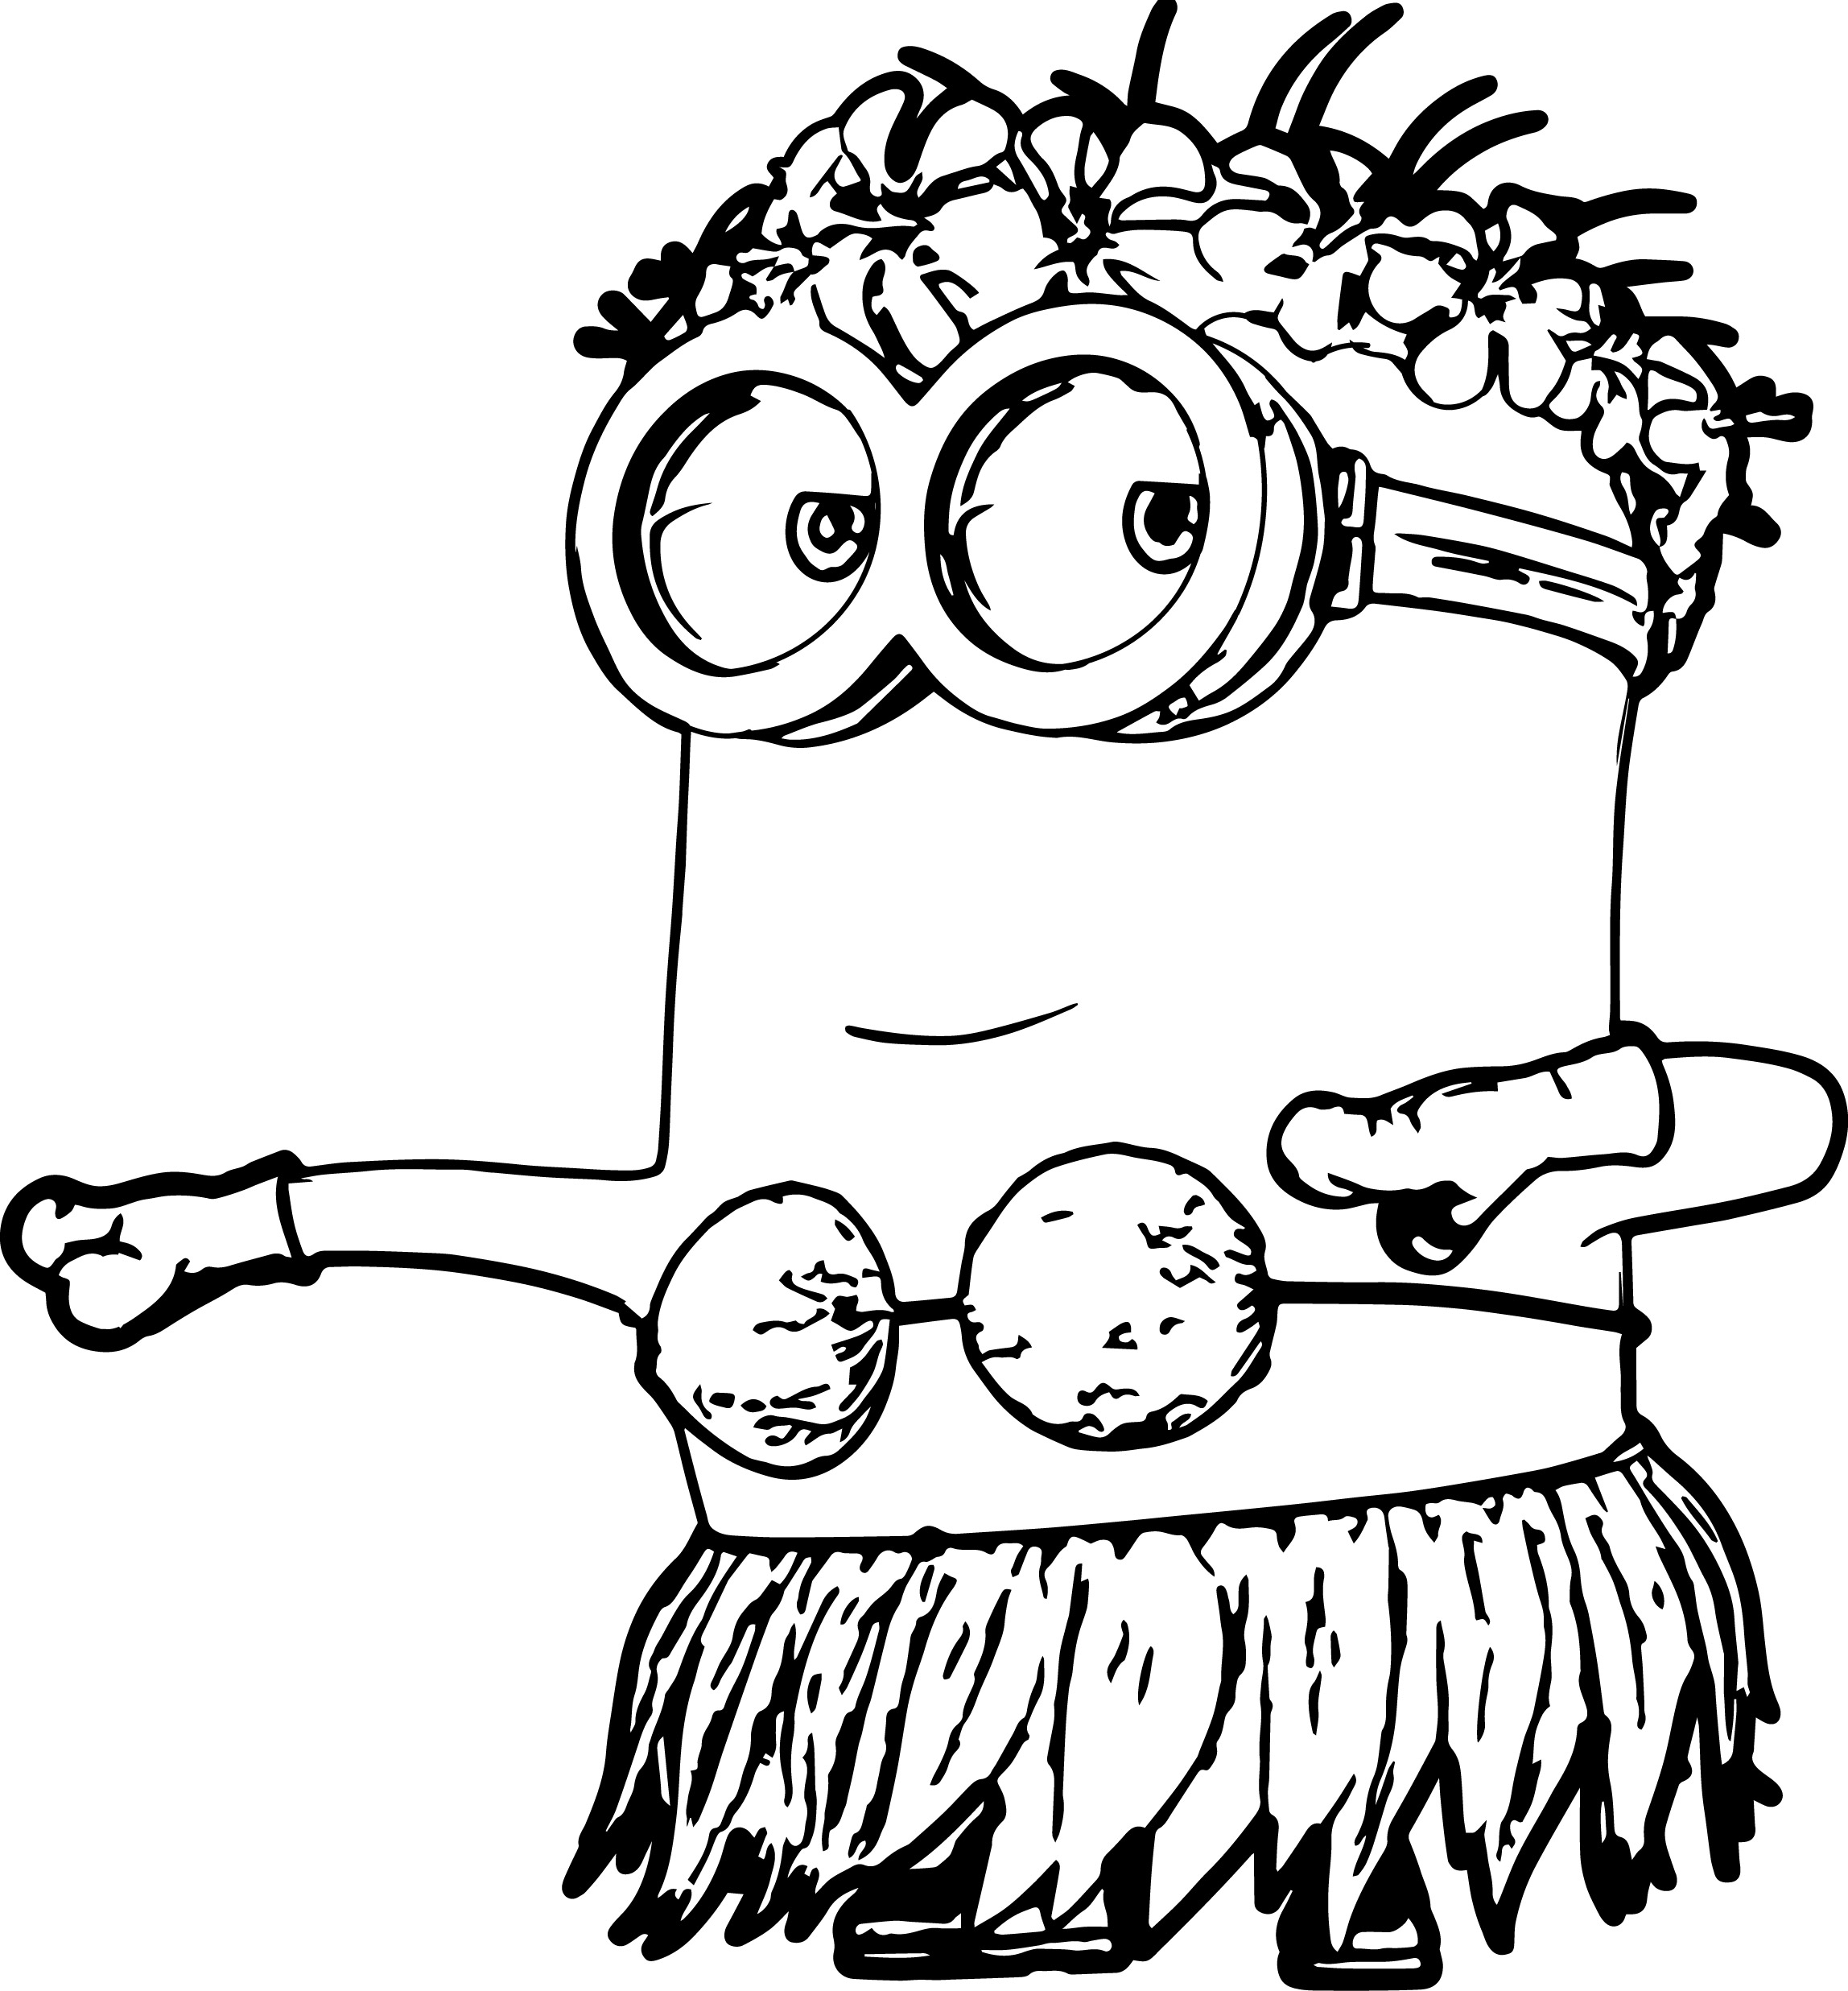 coloring pictures of minions minion coloring pages best coloring pages for kids pictures of coloring minions 1 1